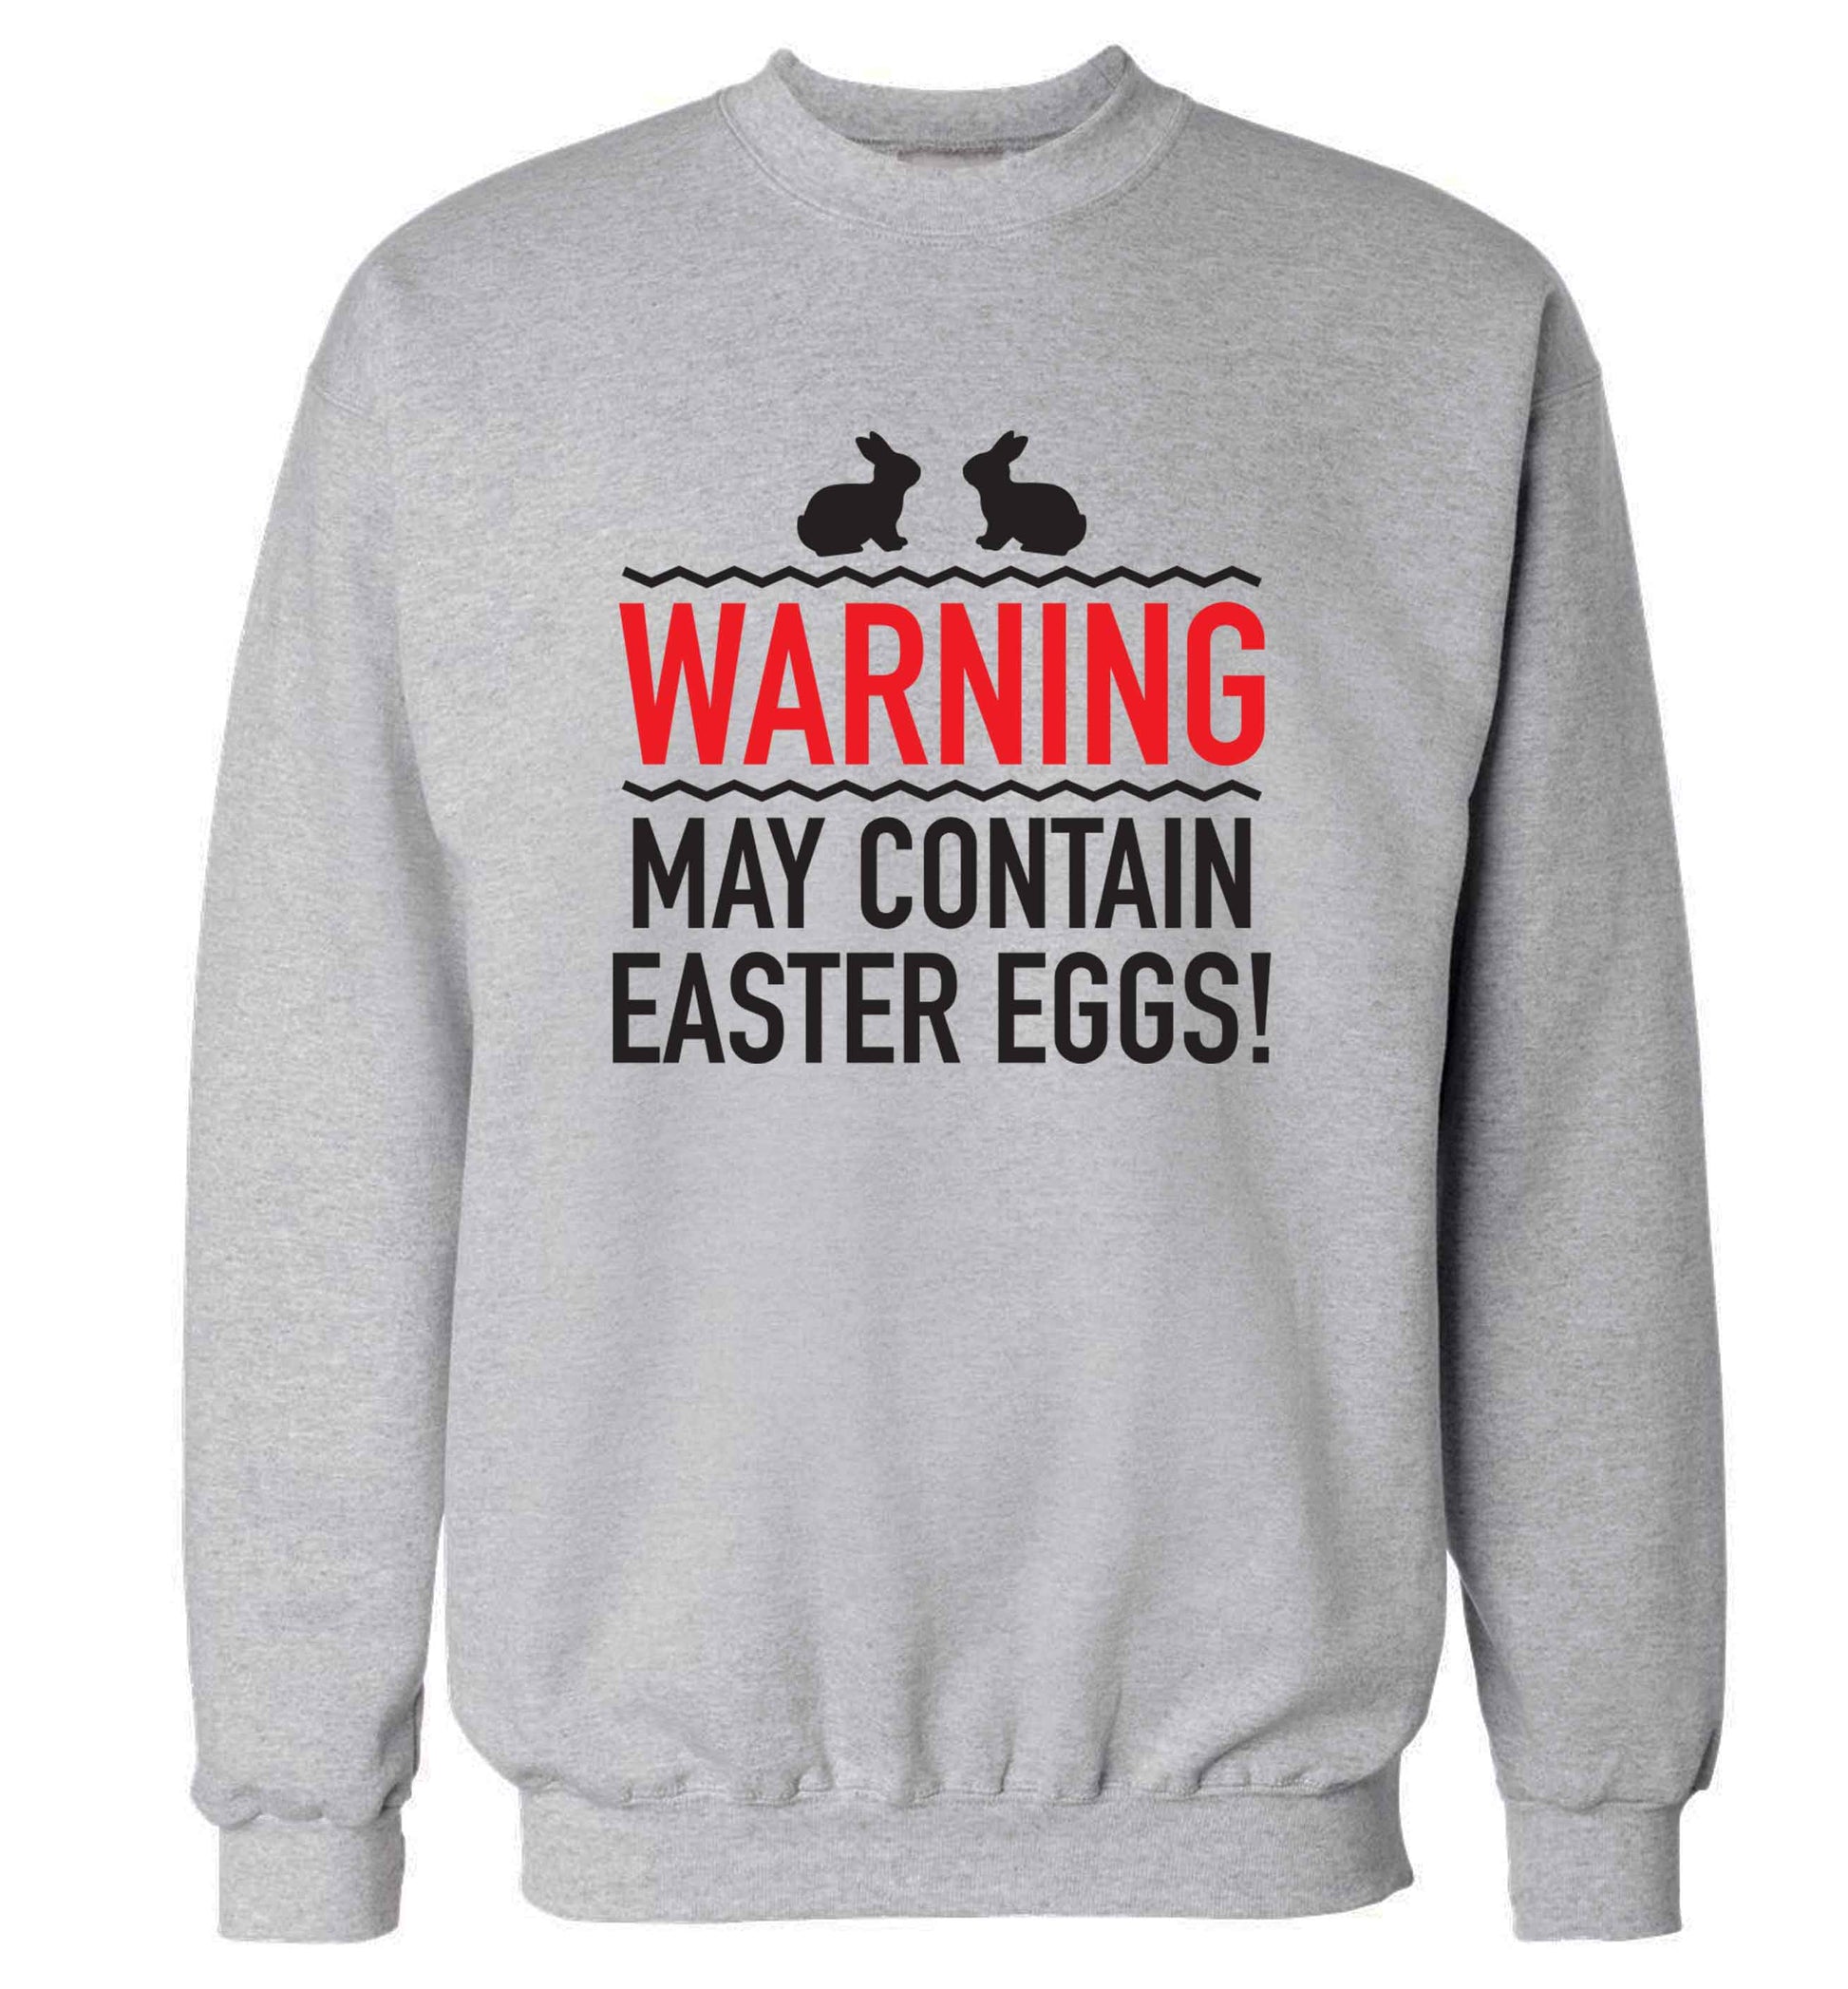 Warning may contain Easter eggs adult's unisex grey sweater 2XL